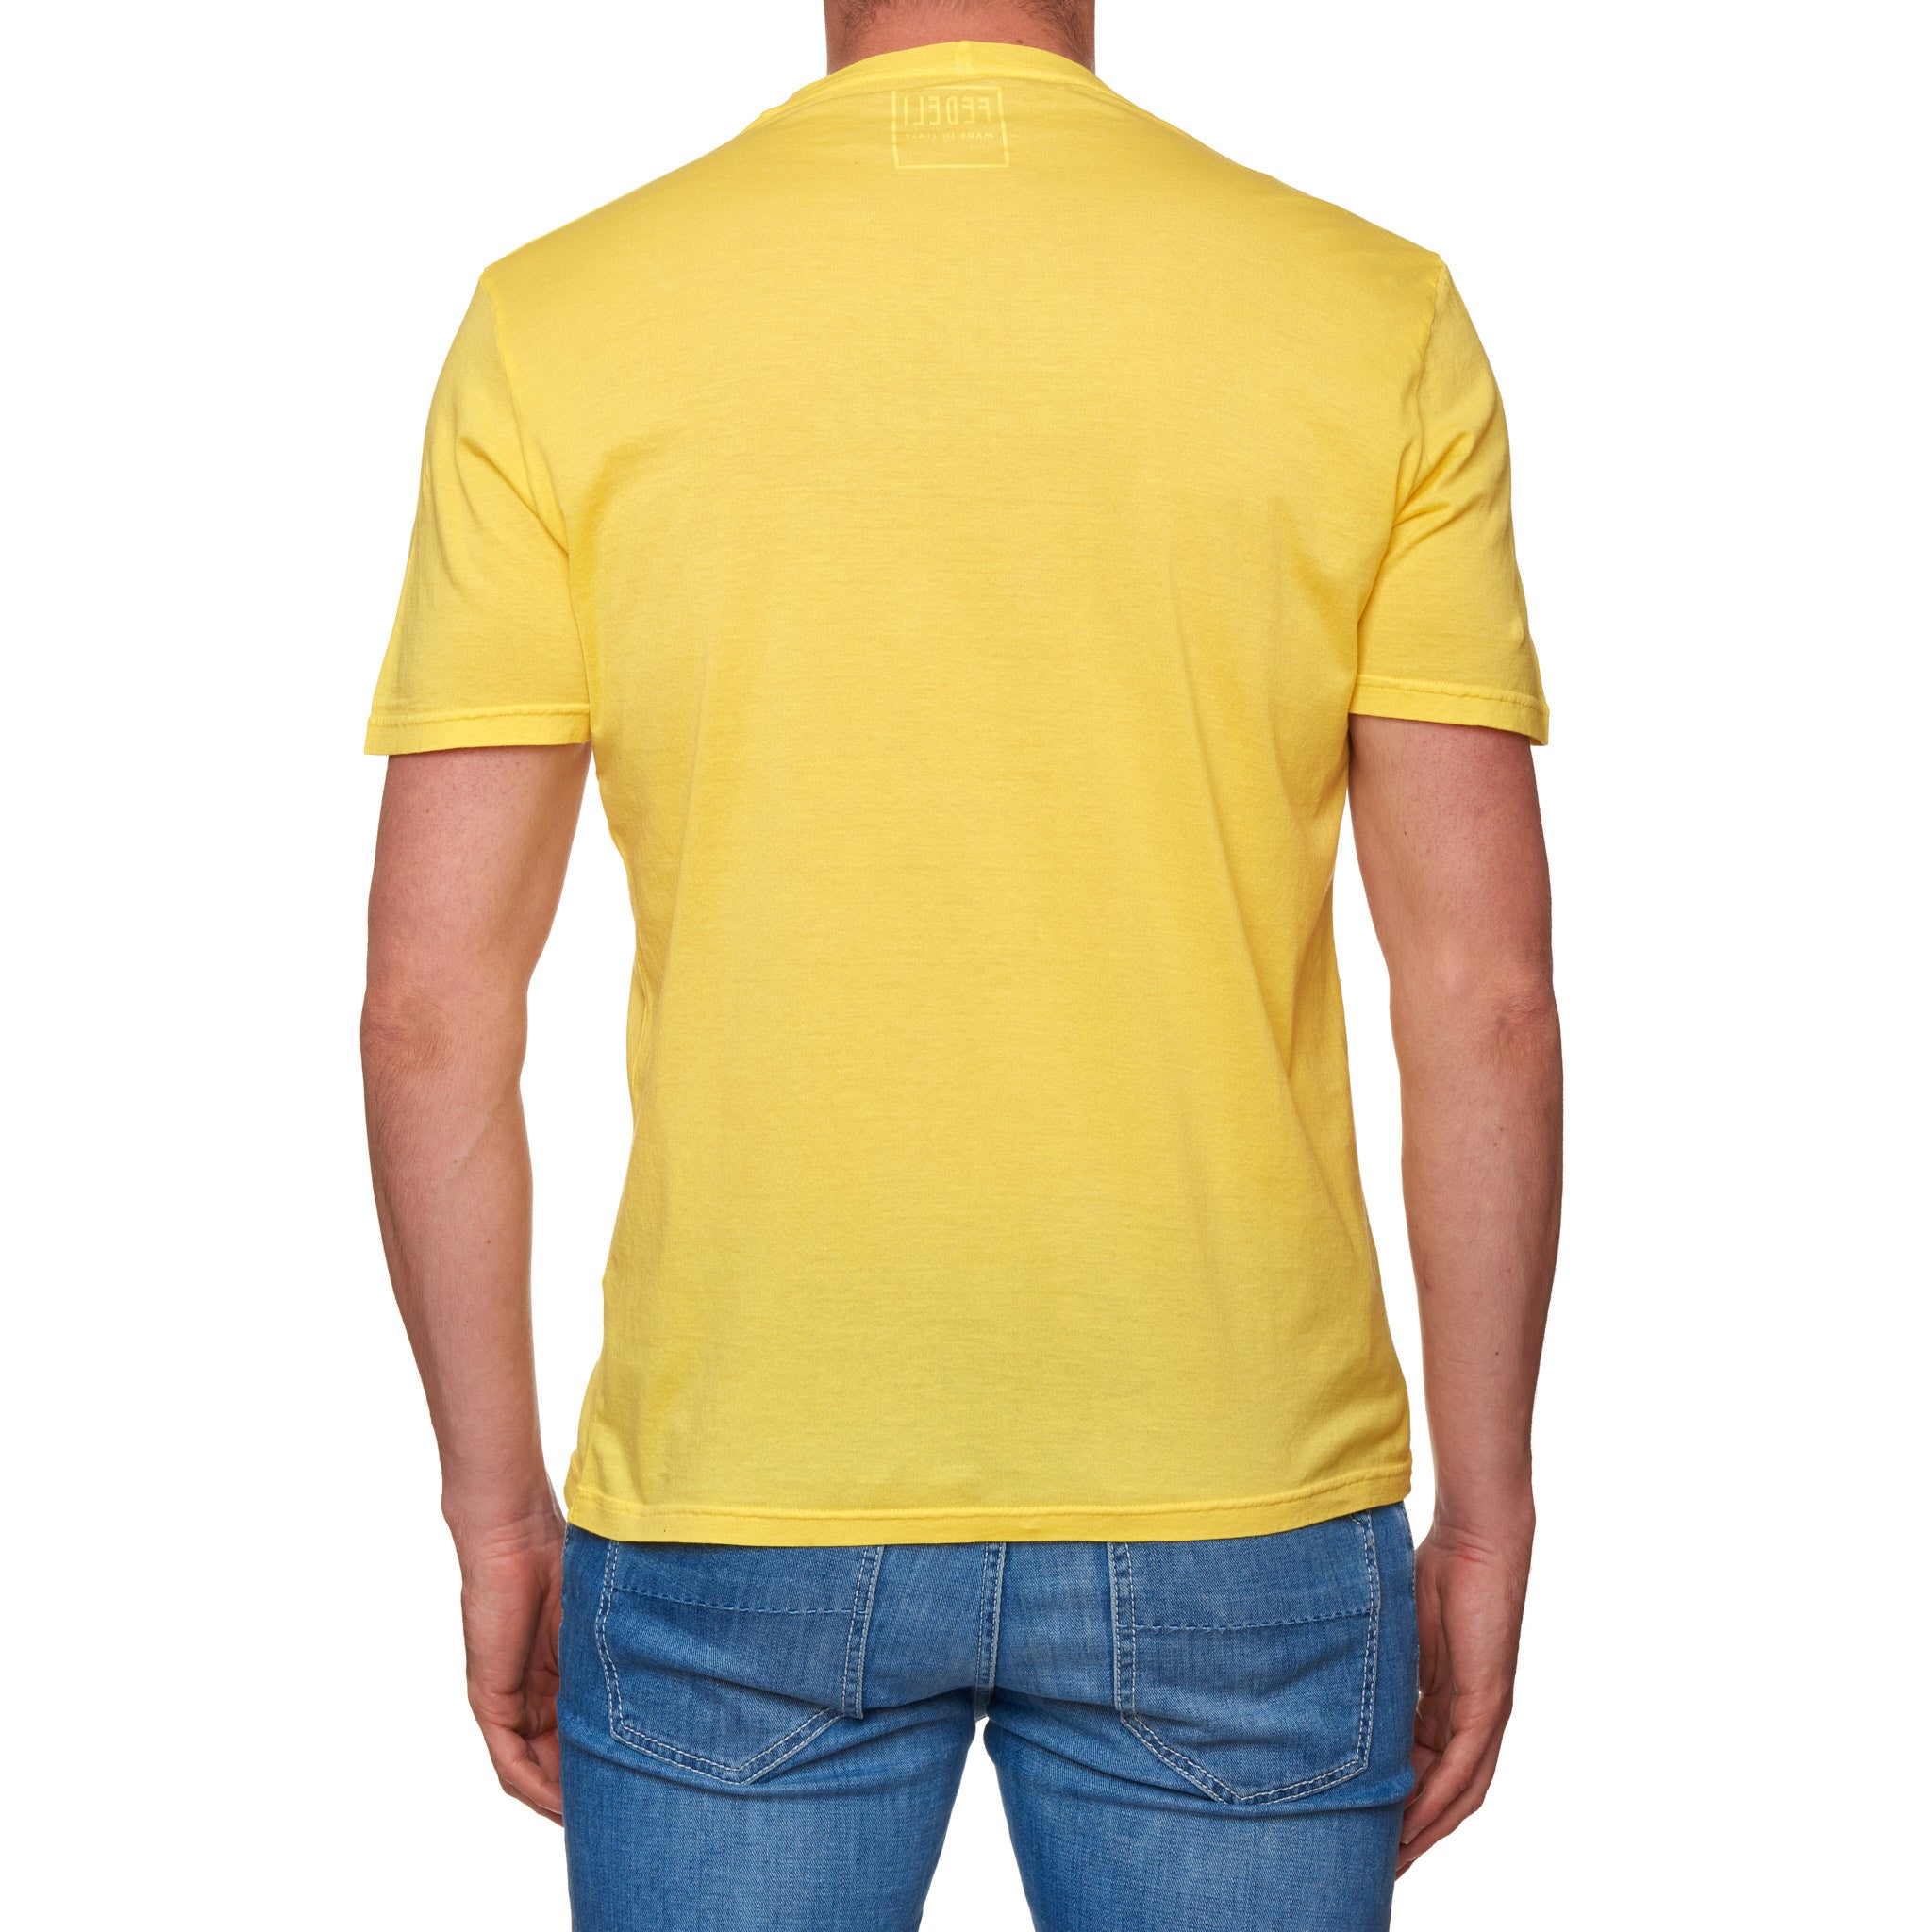 FEDELI "Gary" Yellow Cotton Superlight Frosted Short Sleeve T-Shirt NEW FEDELI